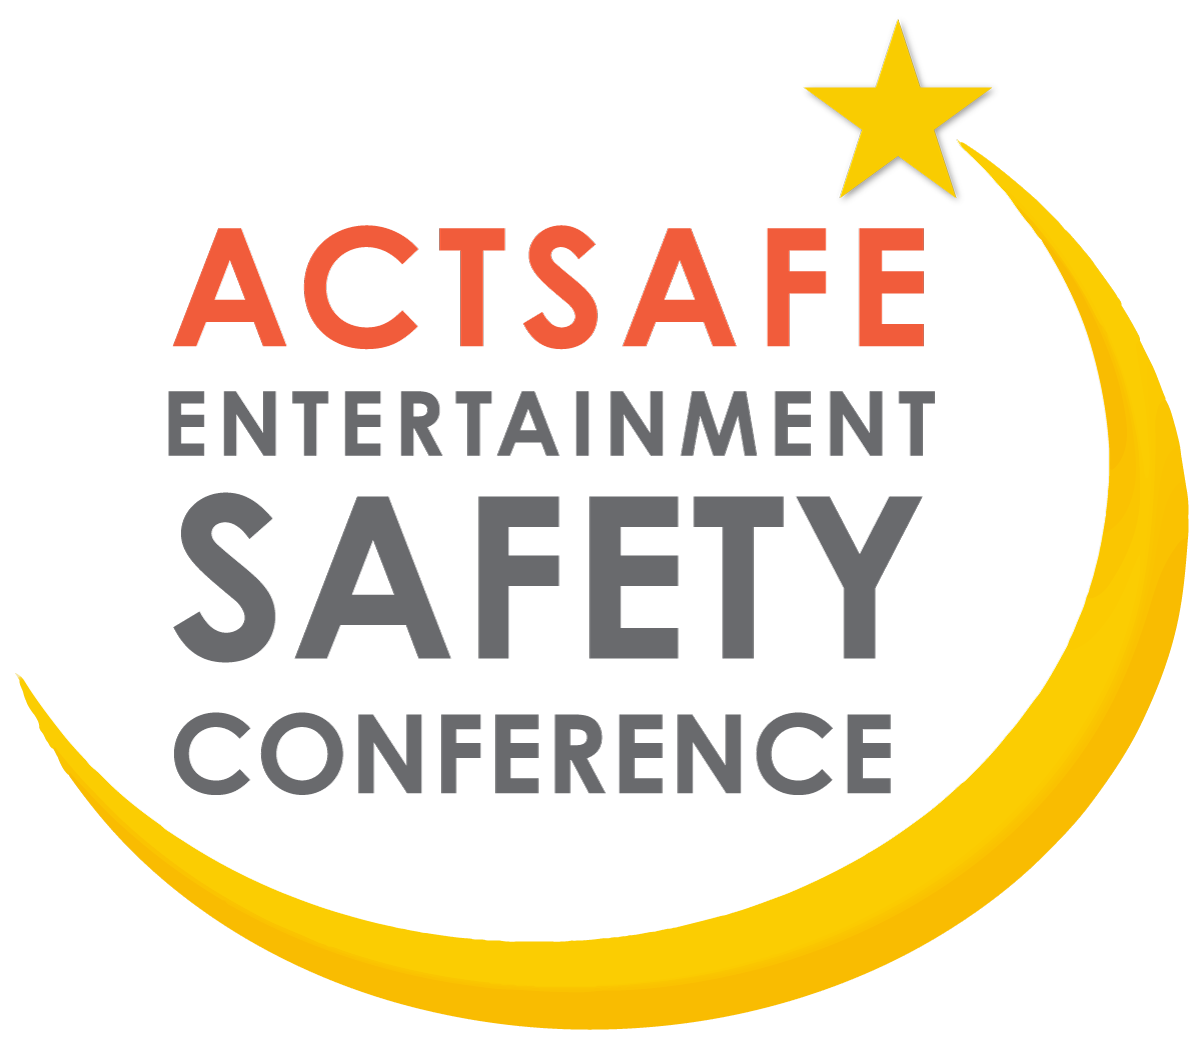 Actsafe Entertainment Safety Conference